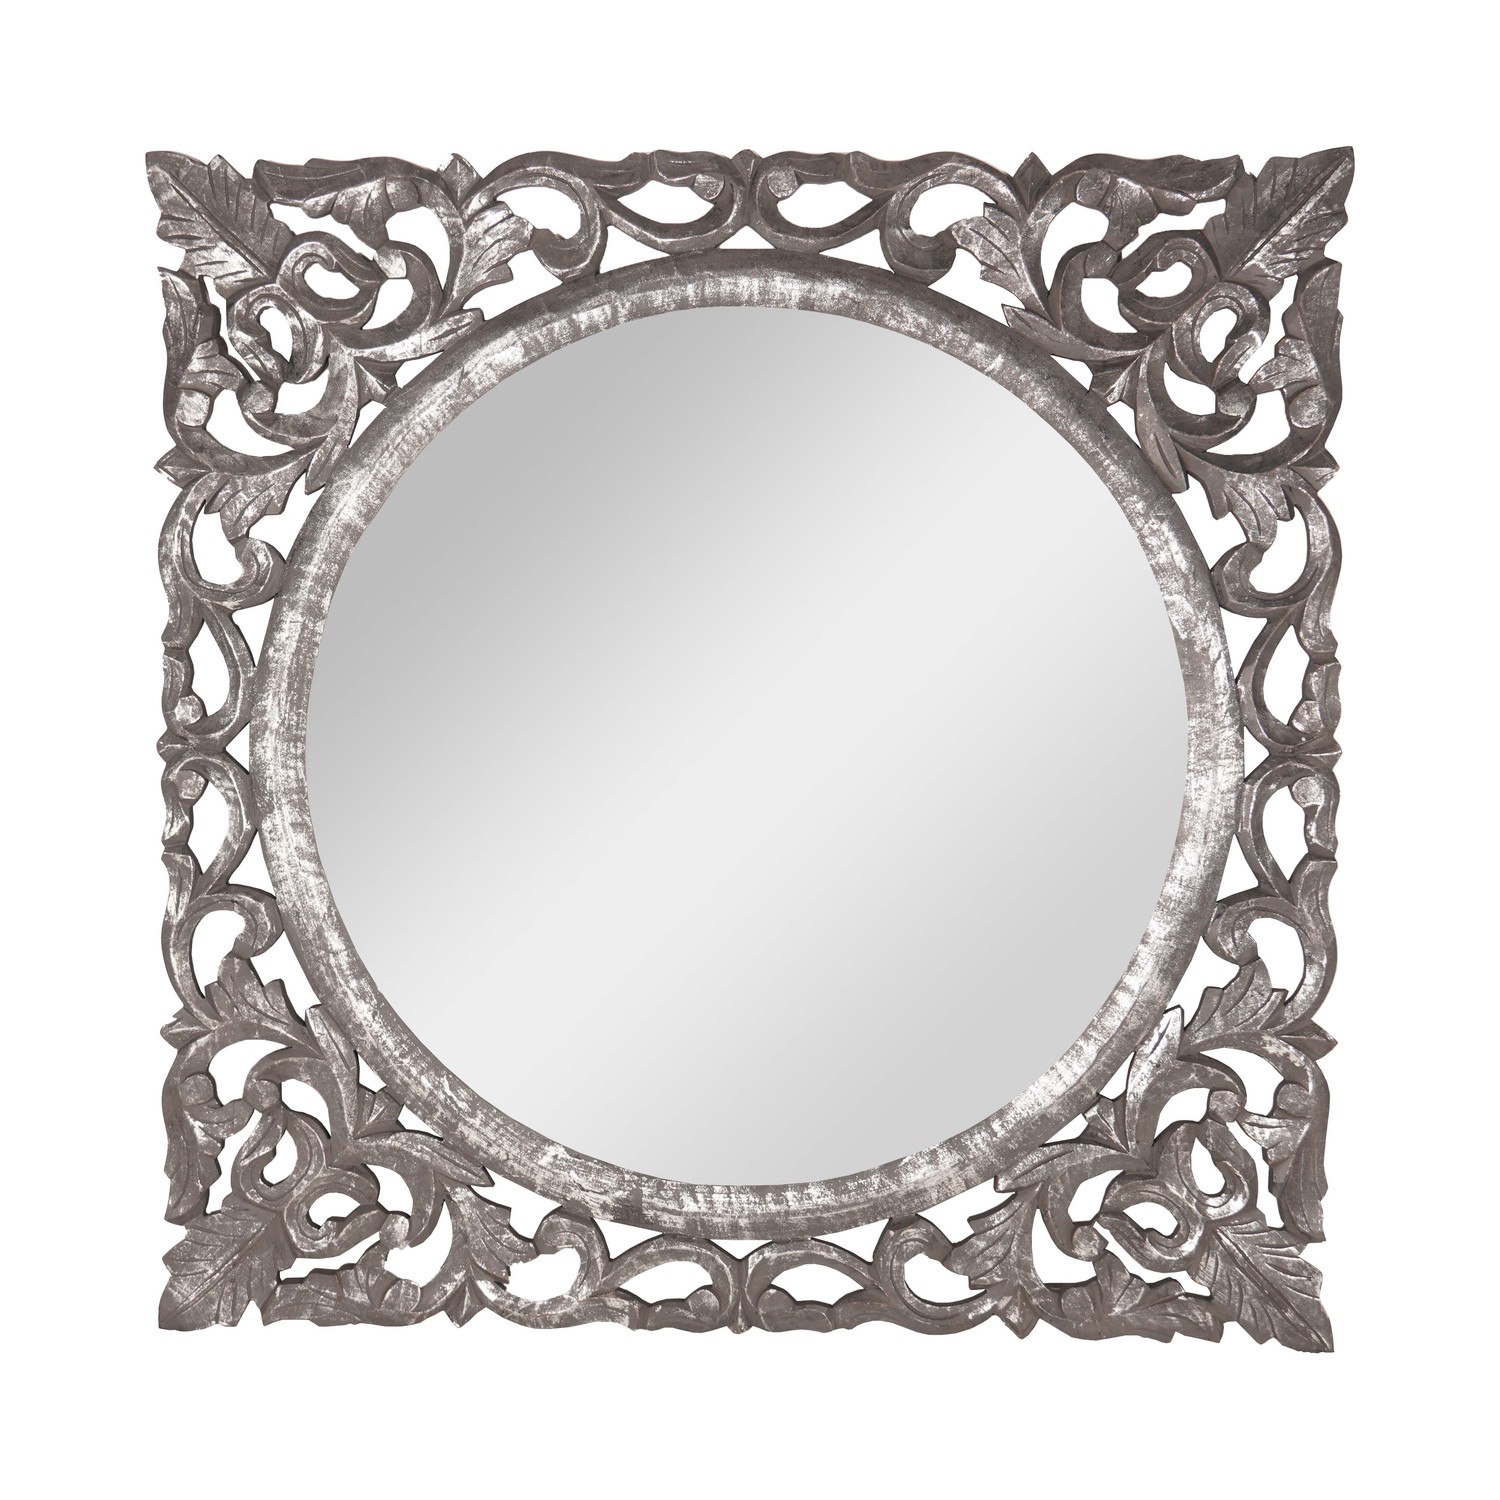 Hand Carved Louis Metallic Large Wall Mirror - Image 1